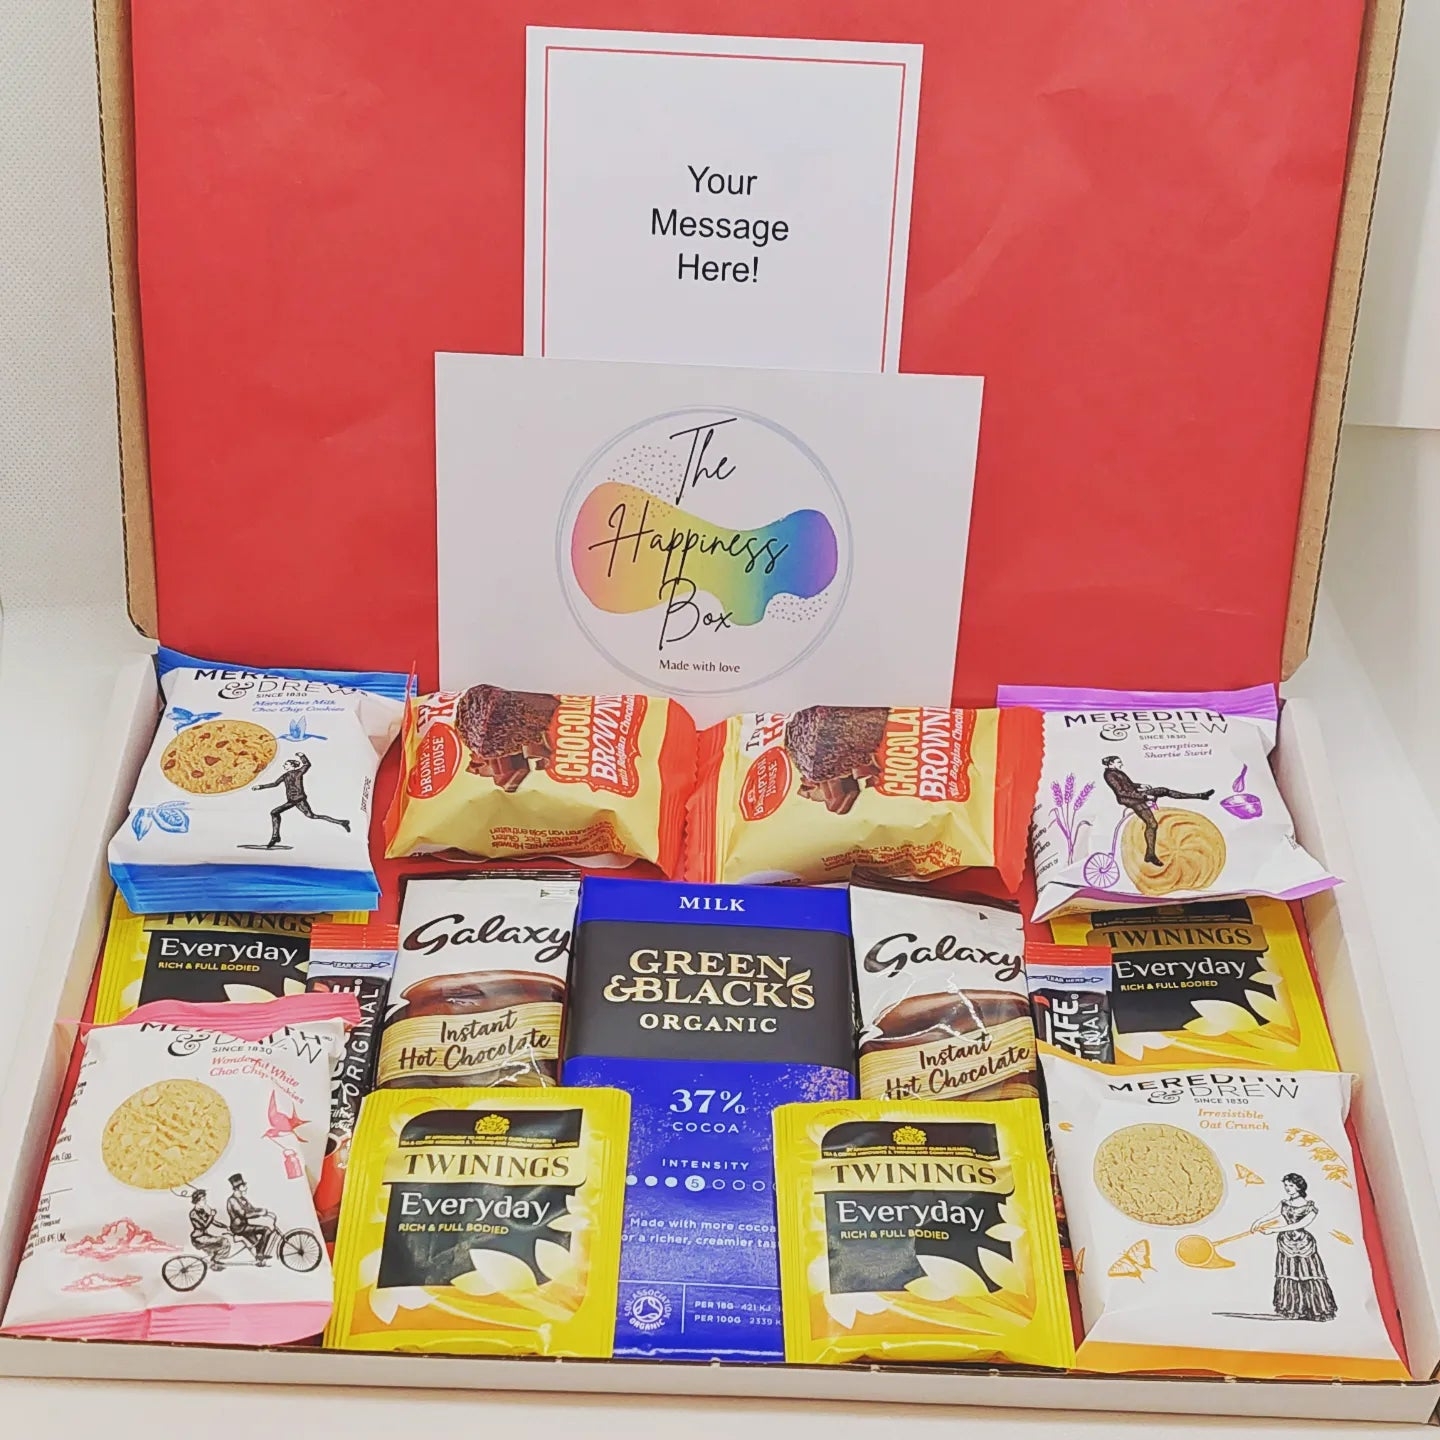 Afternoon Tea Letterbox Gift – The Happiness Box Large